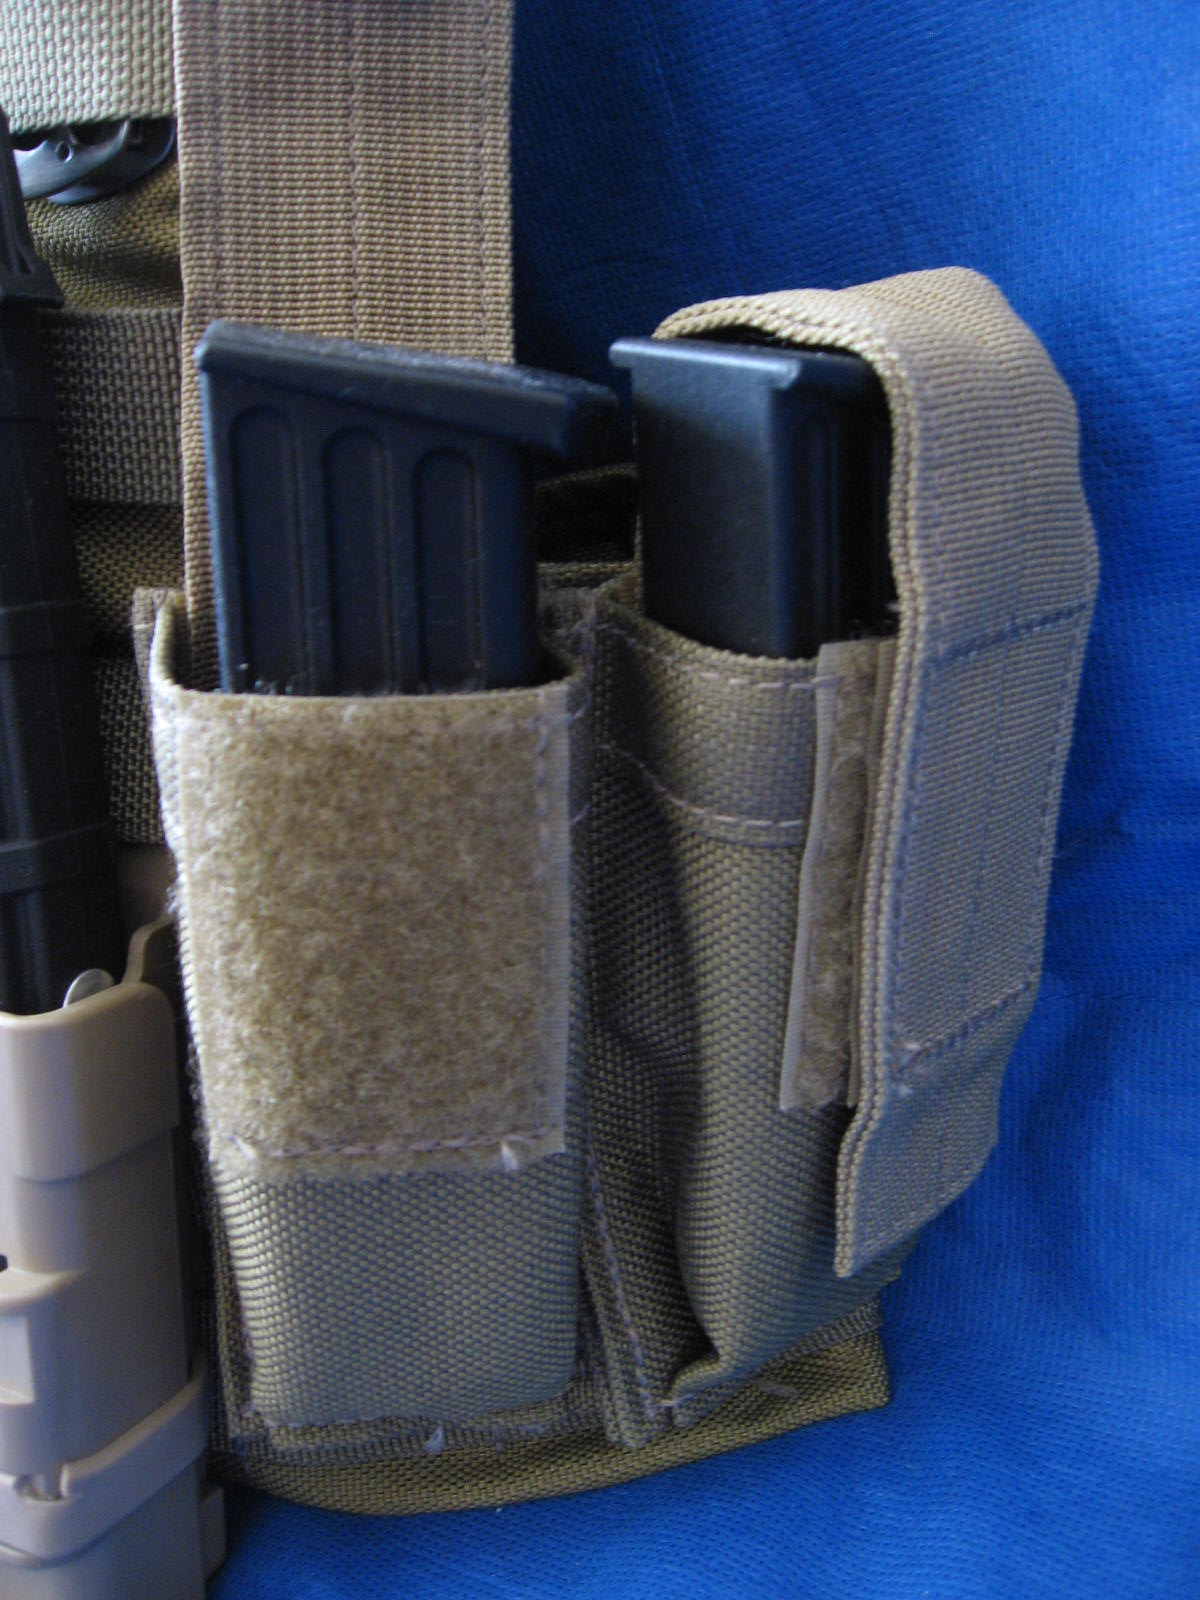 One Guy's Gear: MOLLE Gear: Tactical Tailor MAV Vest and Bib